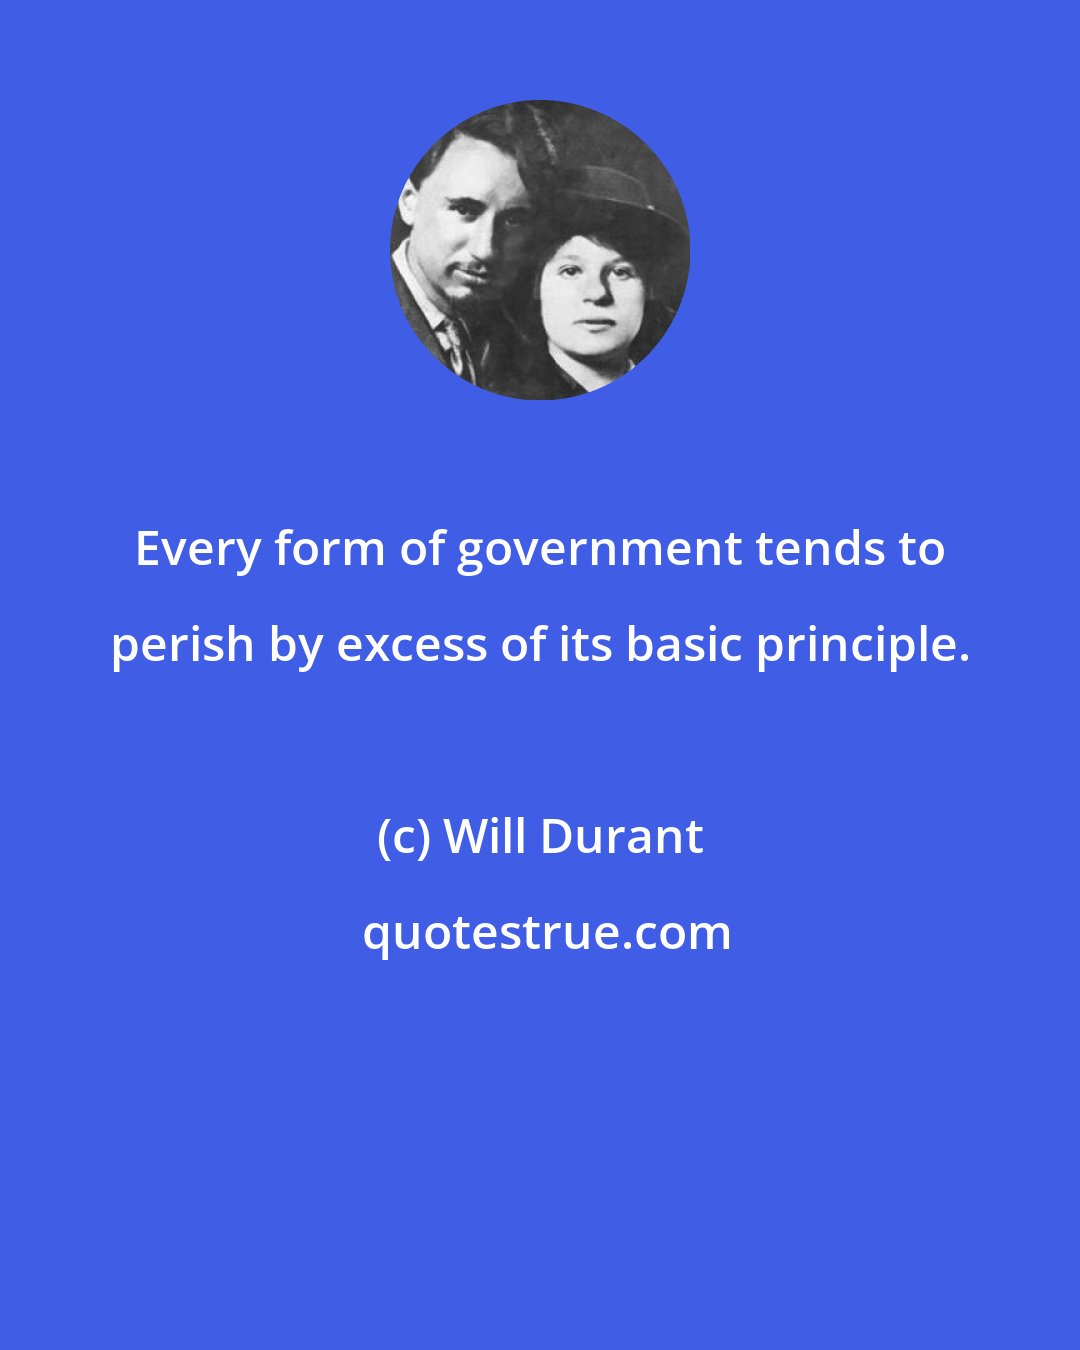 Will Durant: Every form of government tends to perish by excess of its basic principle.